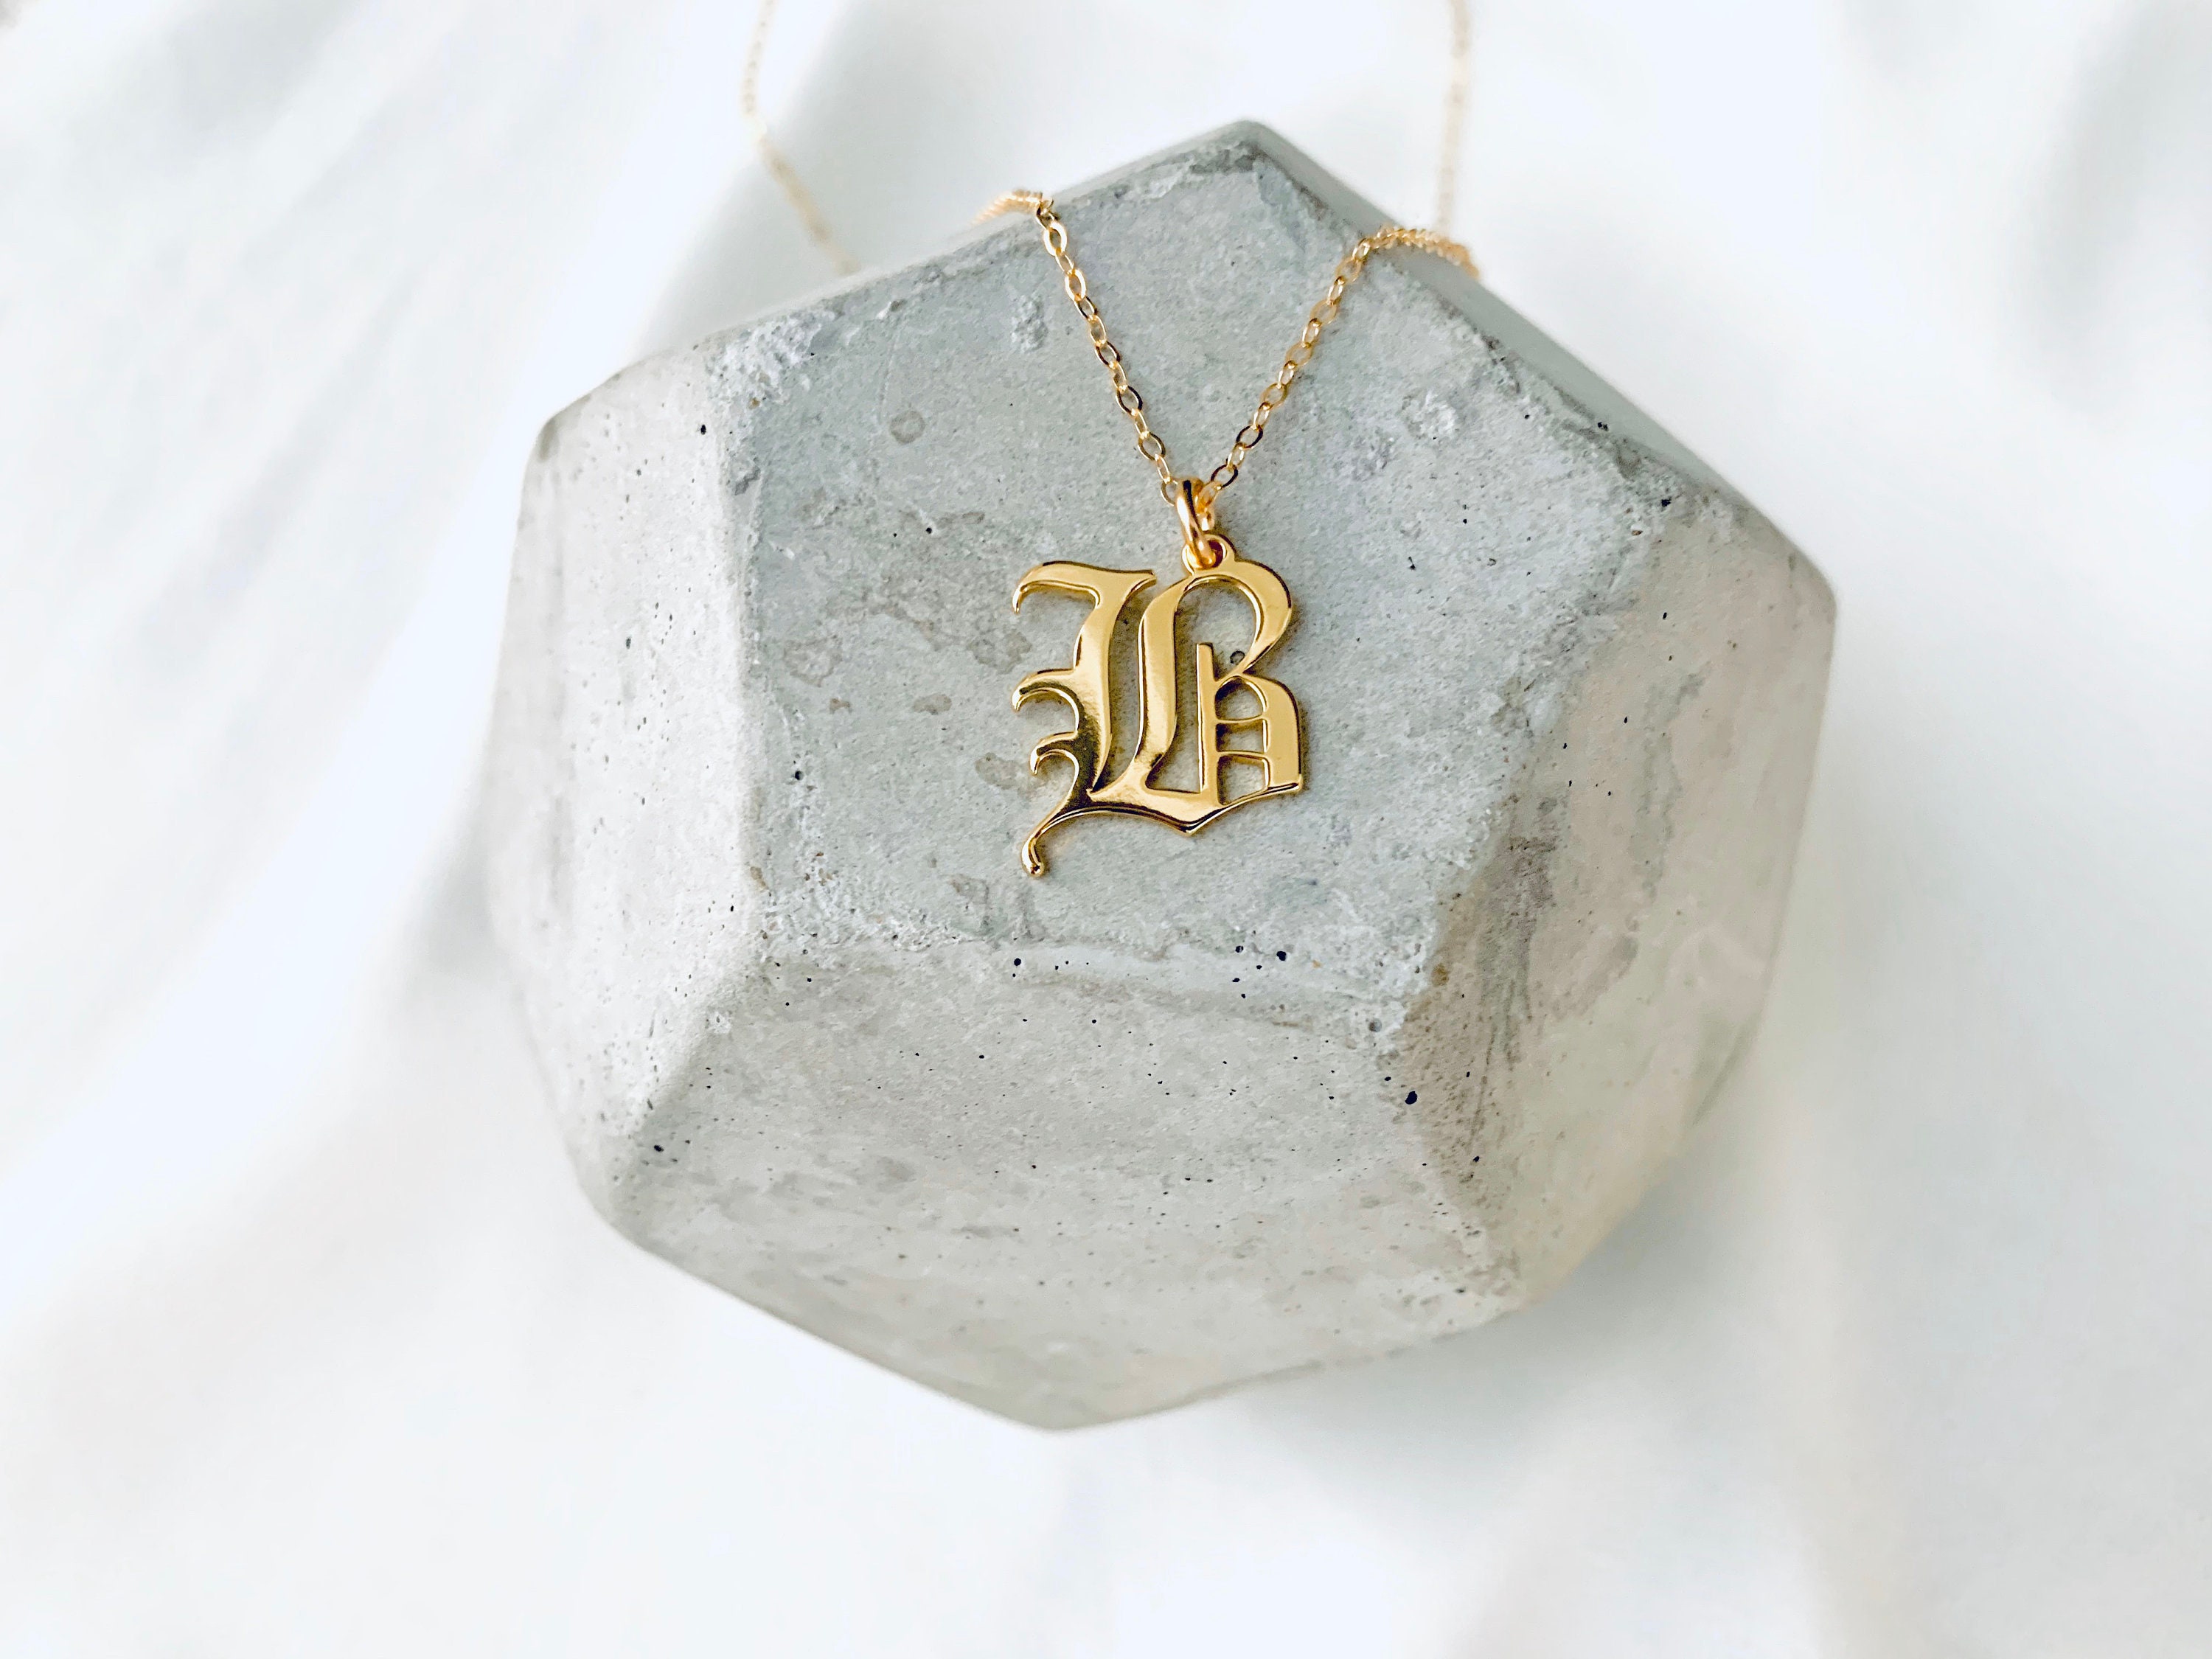 Gothic Old English Solid Initial Letter Charm 14K White Gold / J by Baby Gold - Shop Custom Gold Jewelry